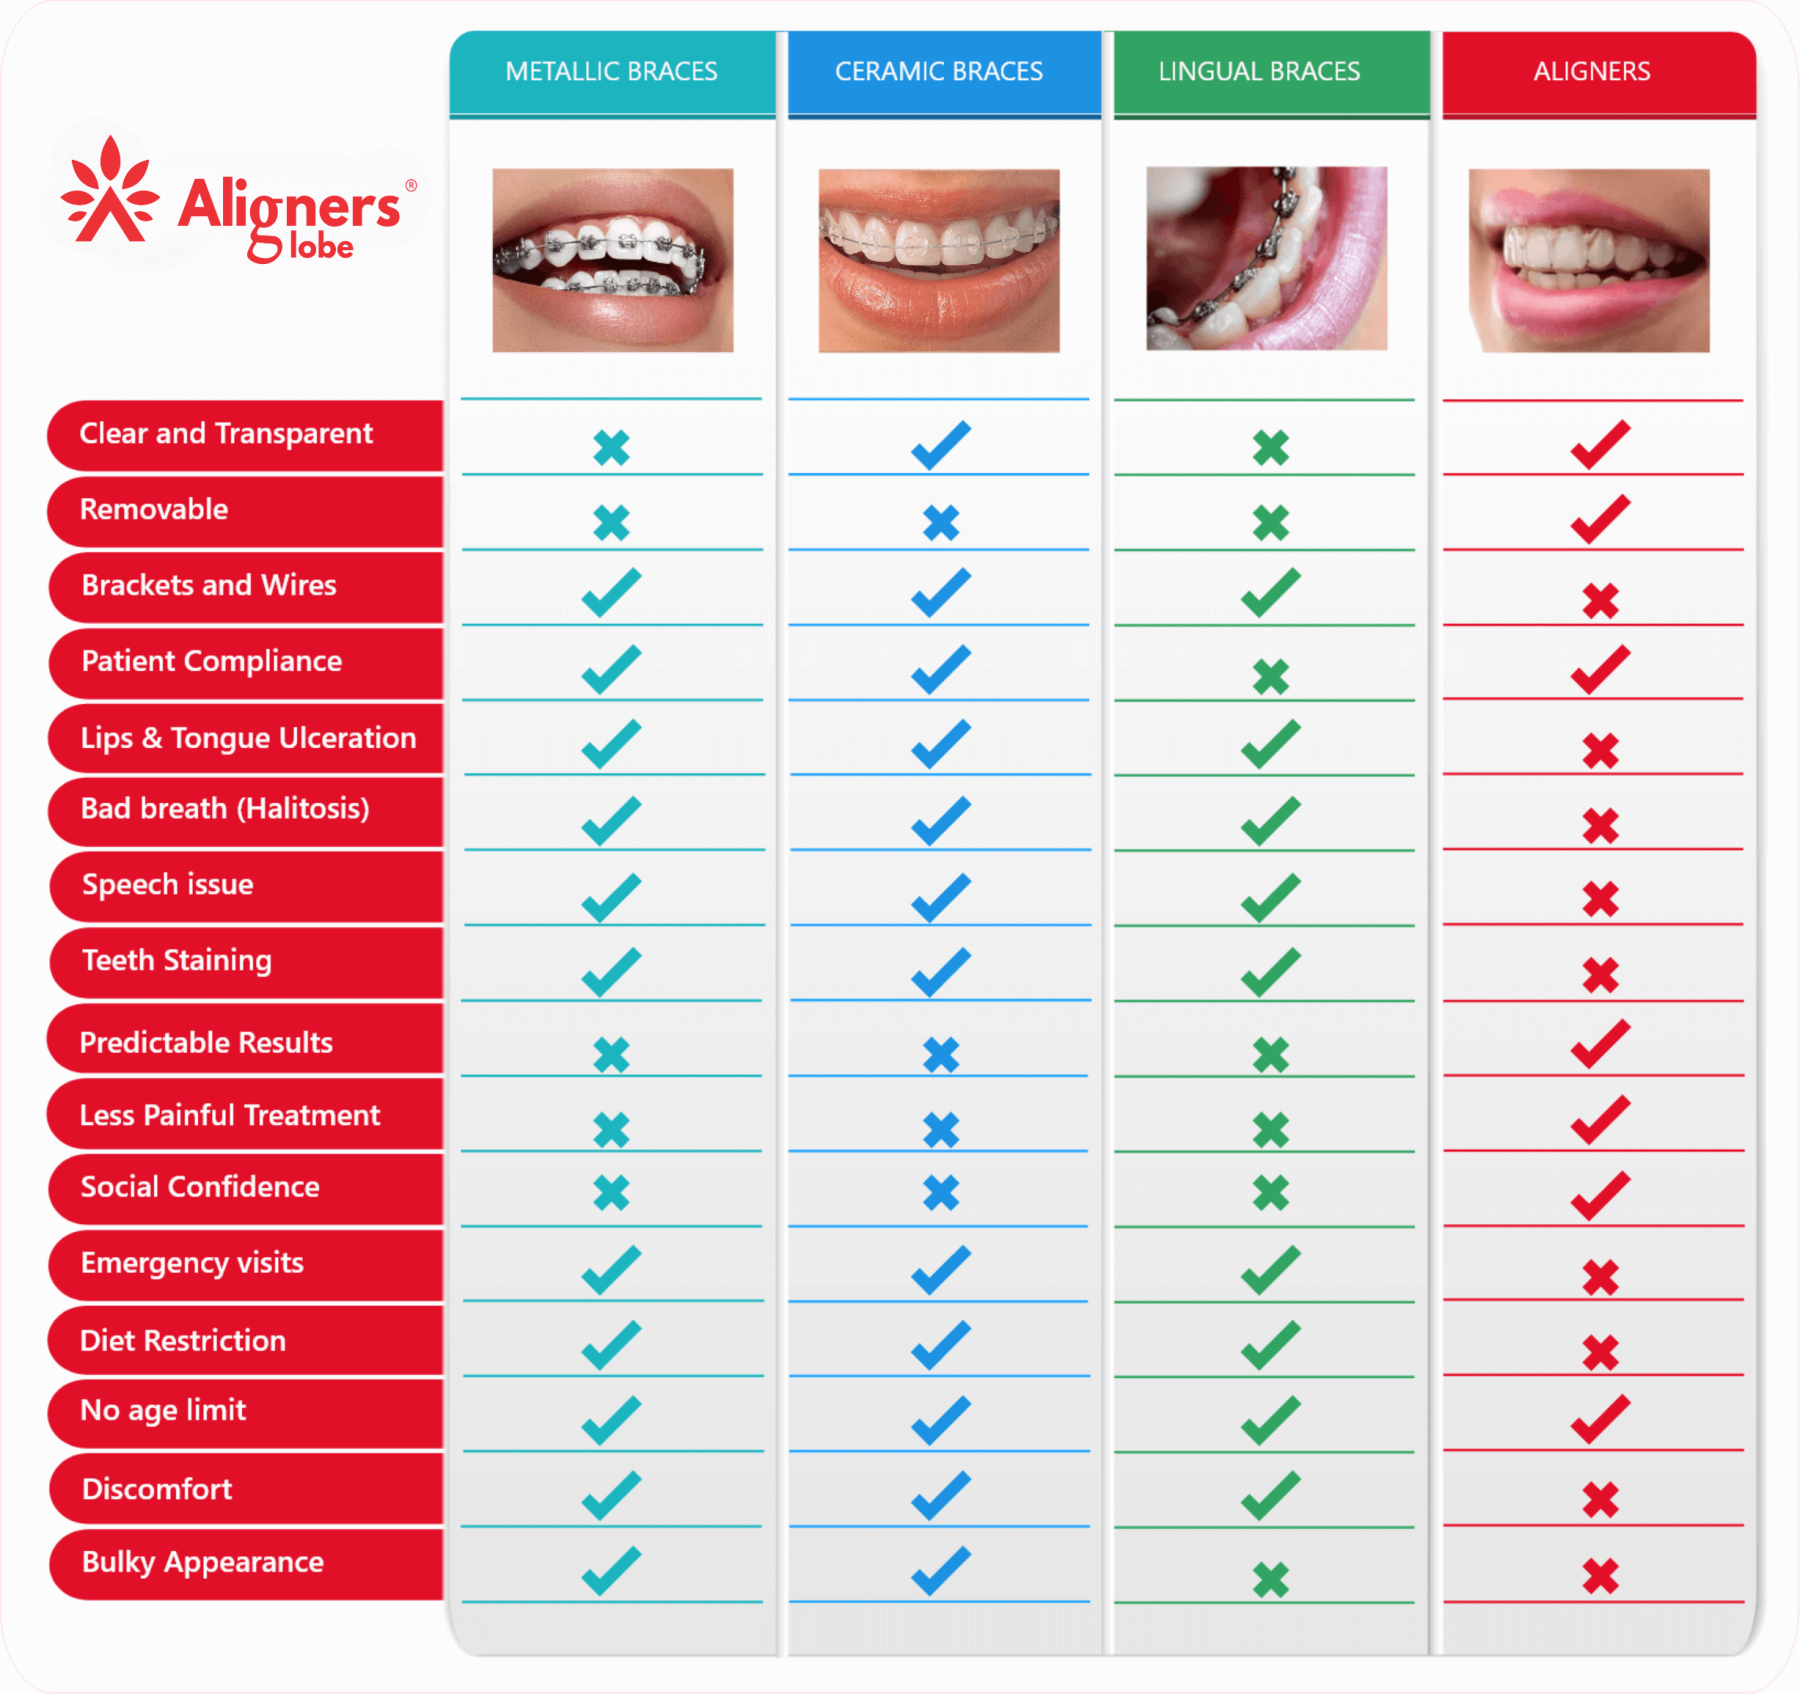 Comparison between different types of braces